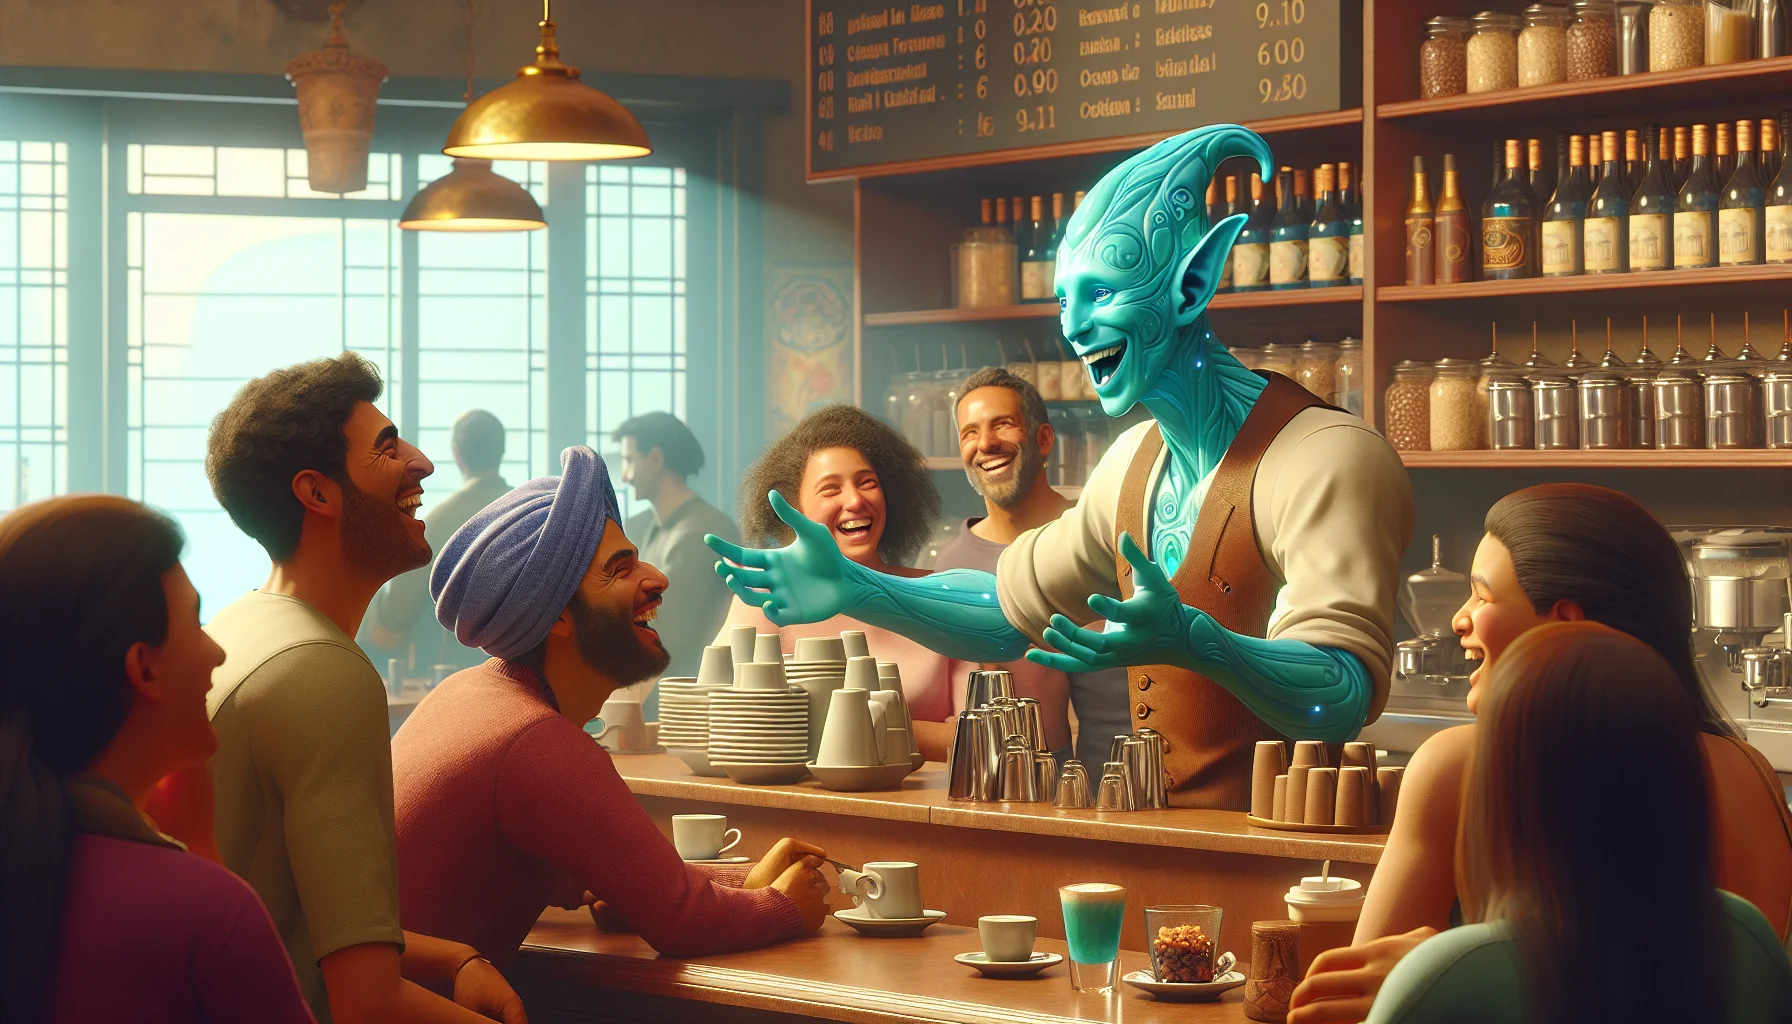 A lively scene set in a coffee shop. The star of this bustling setting is our barista, an aqua-colored humanoid figure with a distinct and commendable charm. Undoubtedly a being from a fantastical world, the barista gestures animatedly, creating scrumptious concoctions with a theatrical flair that elicits laughter and cheer from the crowd around. A diverse group of individuals, a Middle-Eastern woman, a Hispanic man, and a South Asian teenager, are held captivated by the barista's delightful antics. Each one is visibly enthralled, laughter lines evident around their eyes.